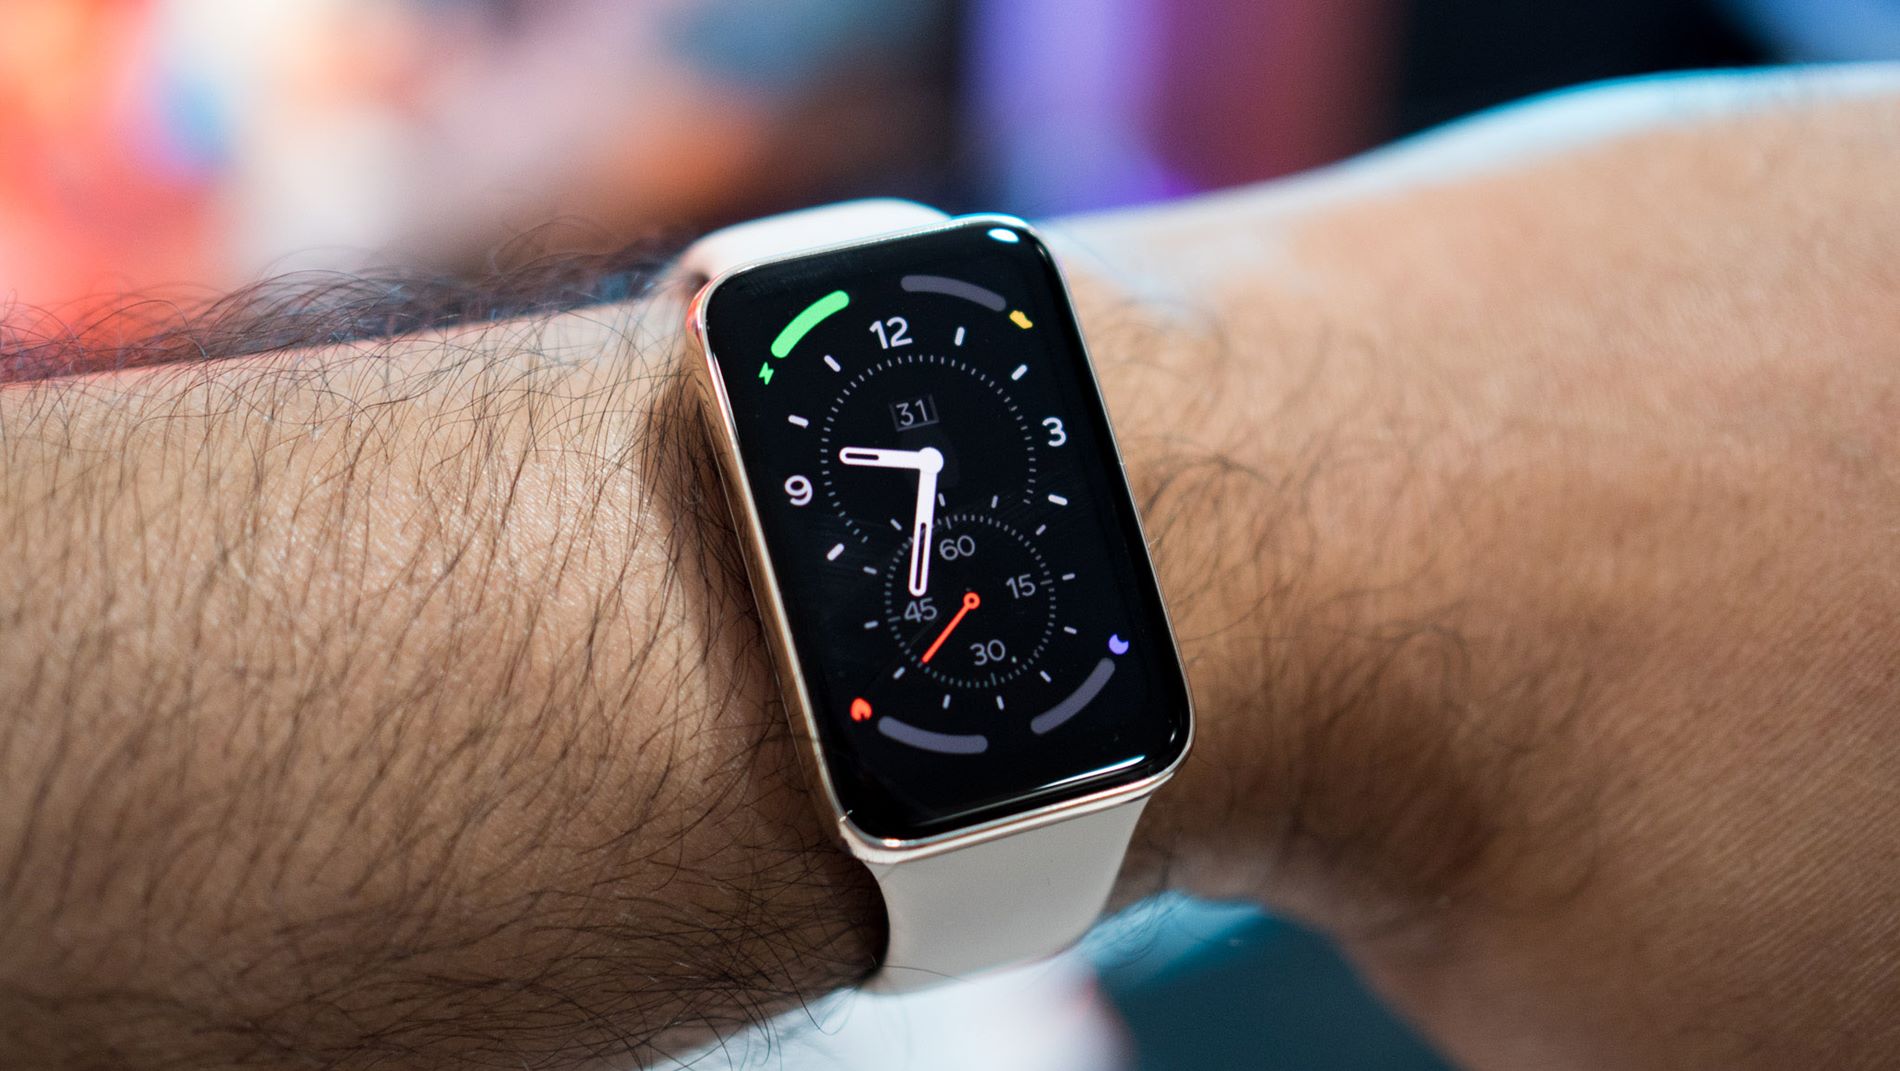 How To Change Time On Smart Watch